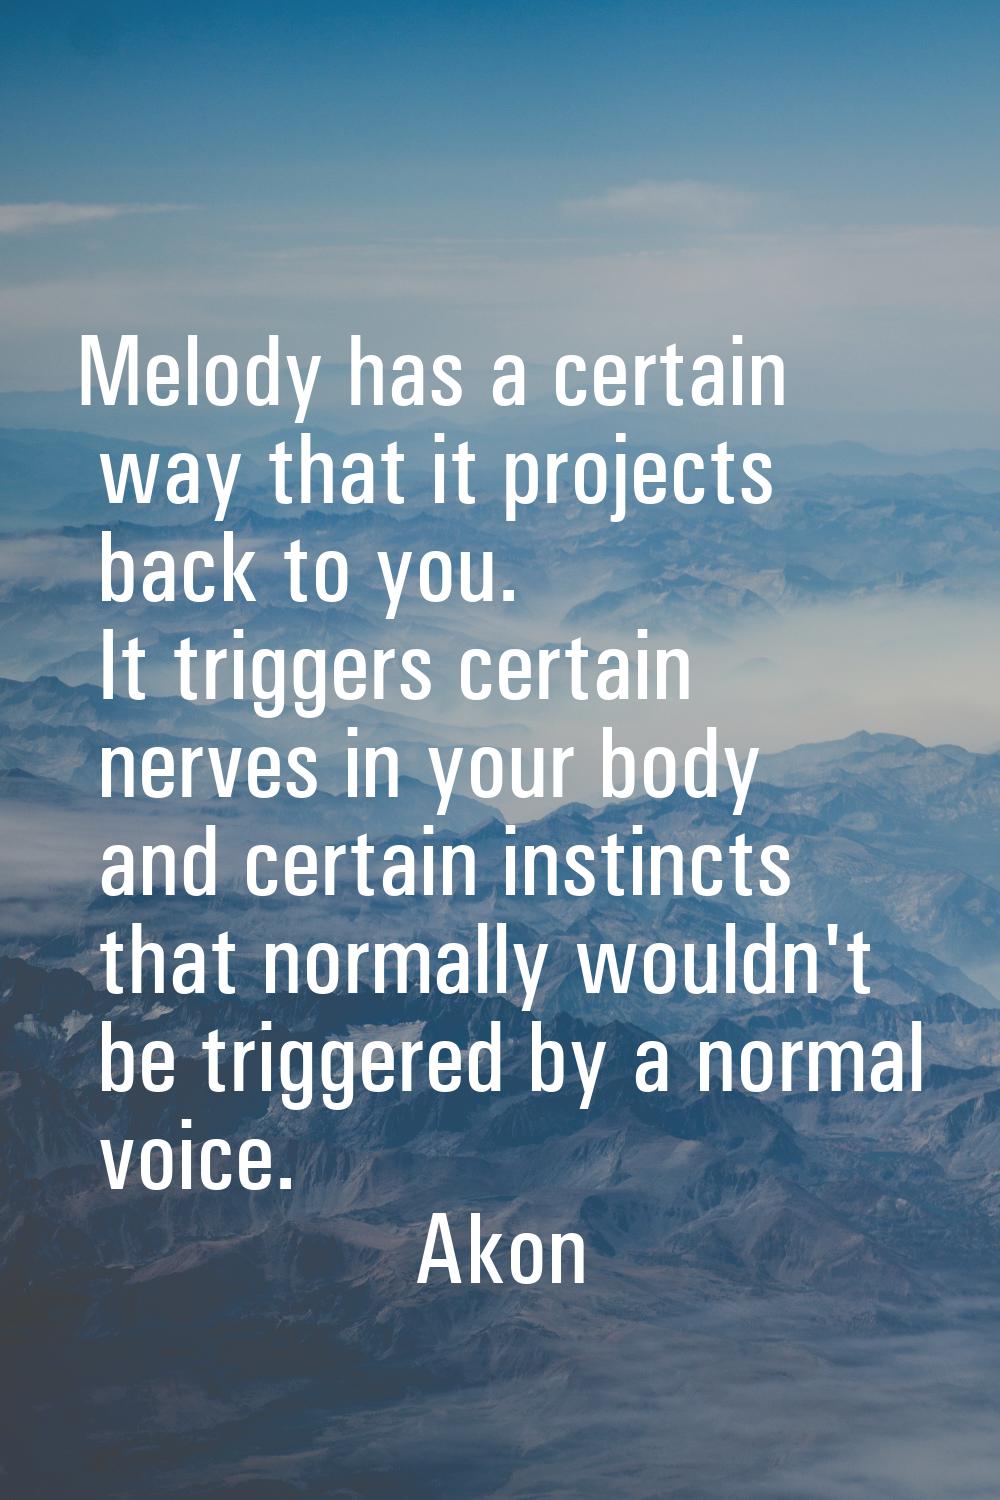 Melody has a certain way that it projects back to you. It triggers certain nerves in your body and 